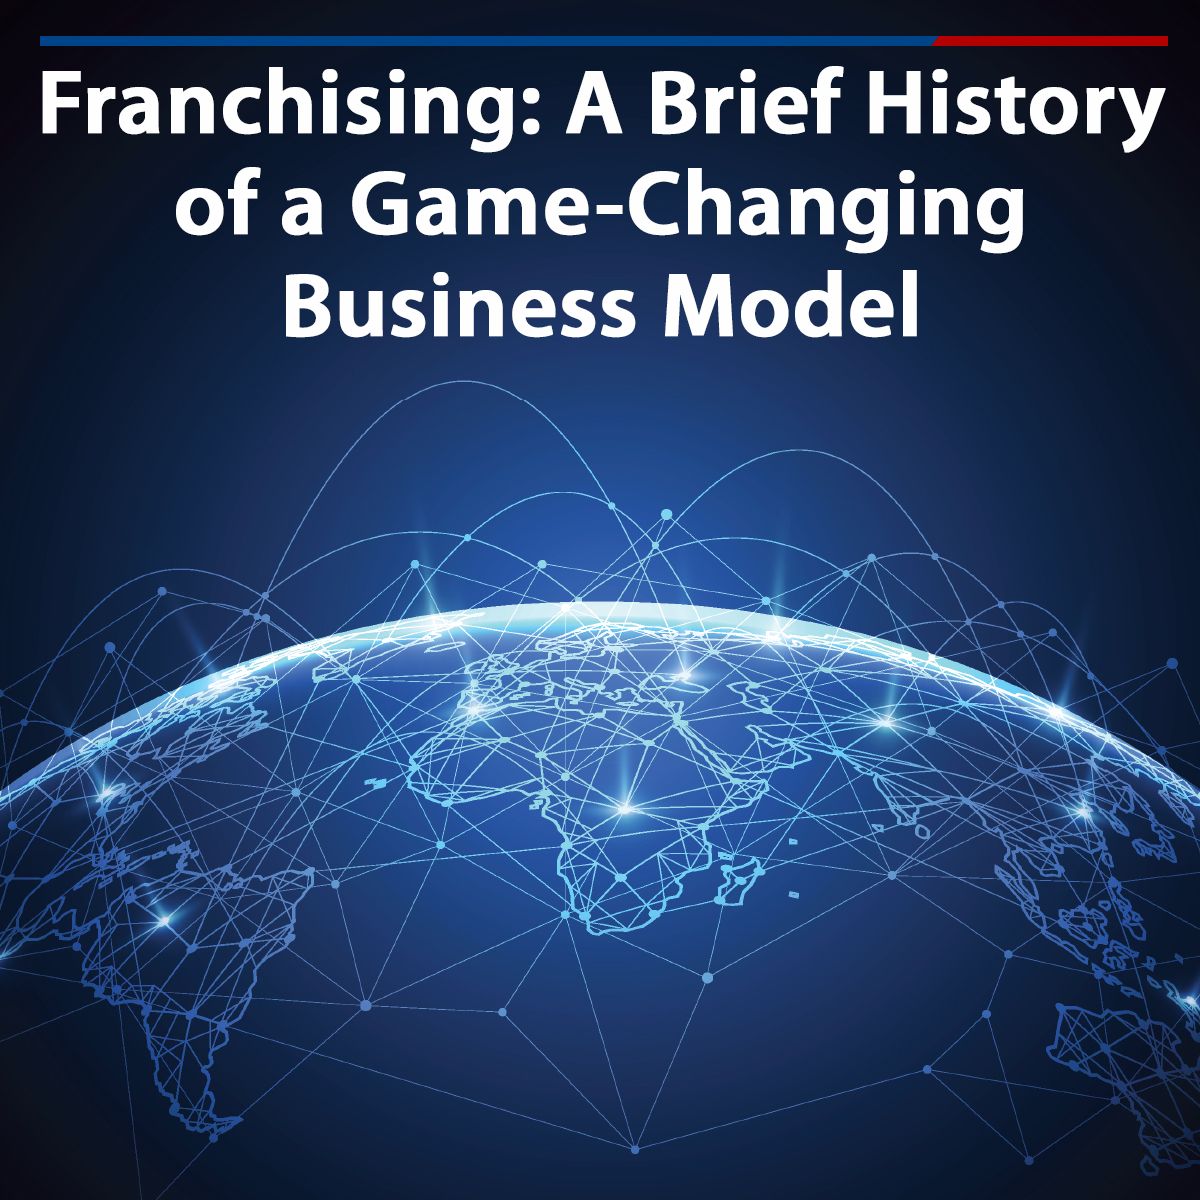 Franchising: Brief History of a Game-Changing Business Model